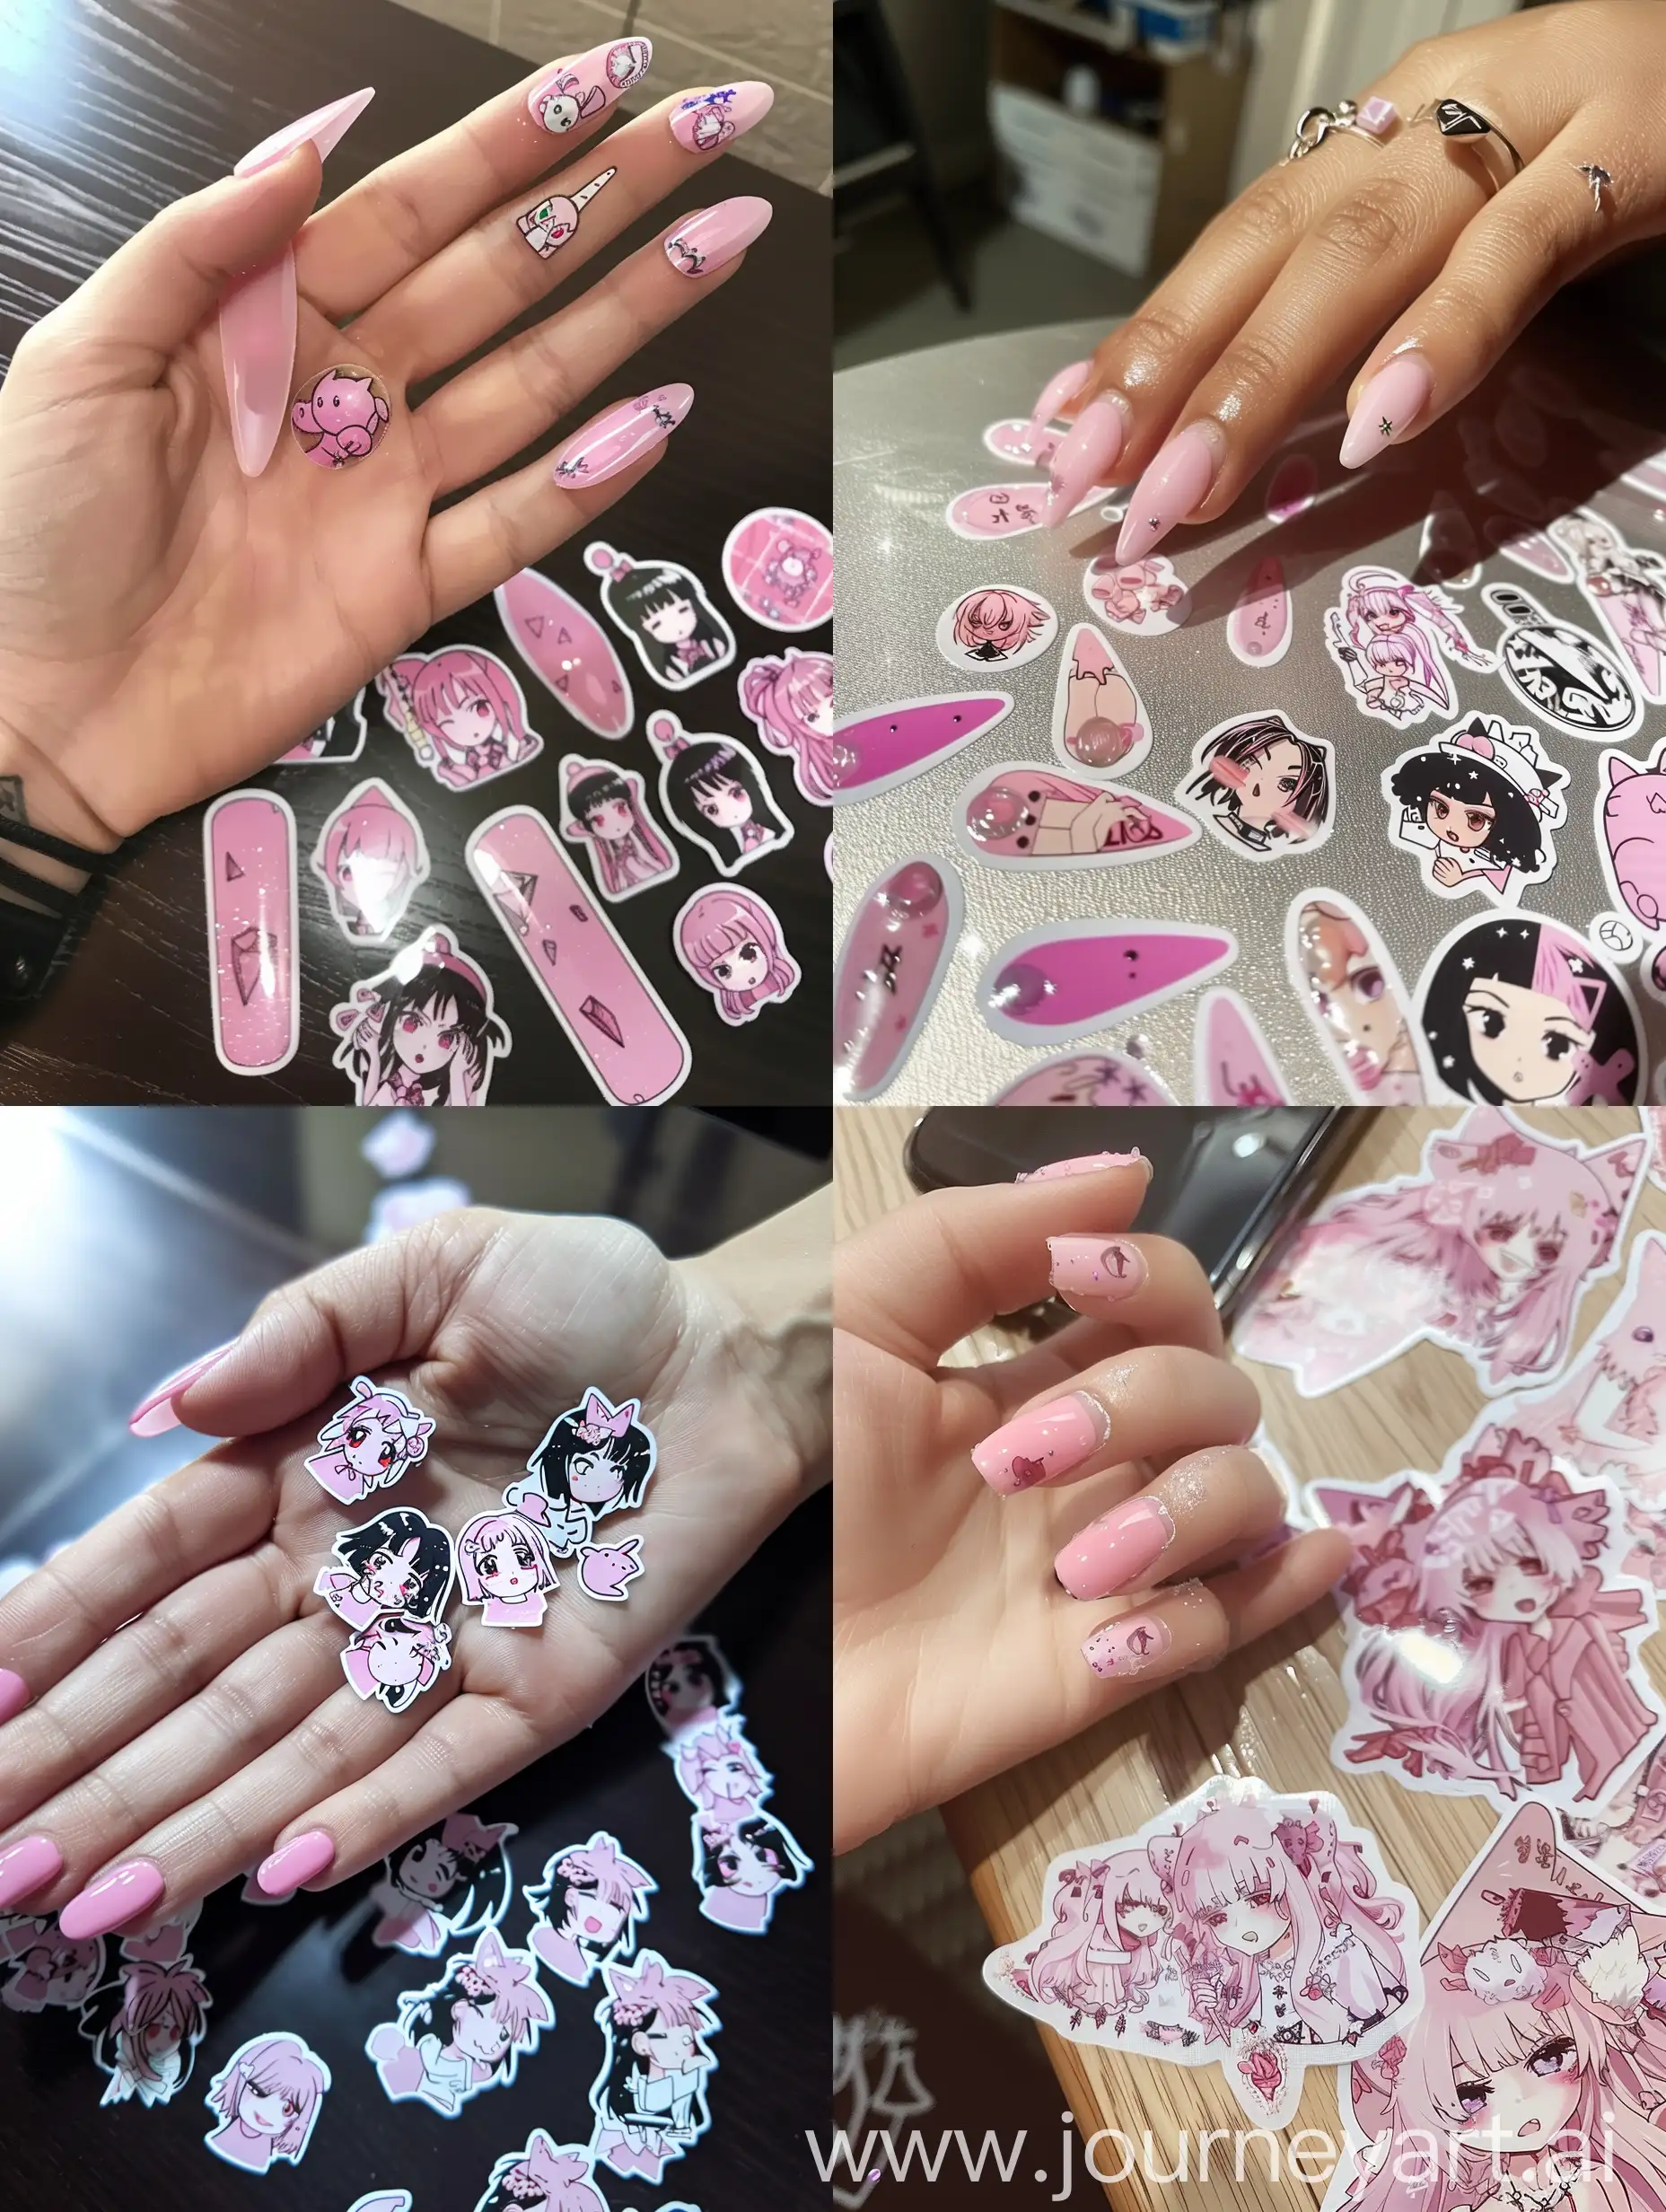  a selfie  girl hand wity pink nail art, and many much pink anime sticker on the table --ar 3:4